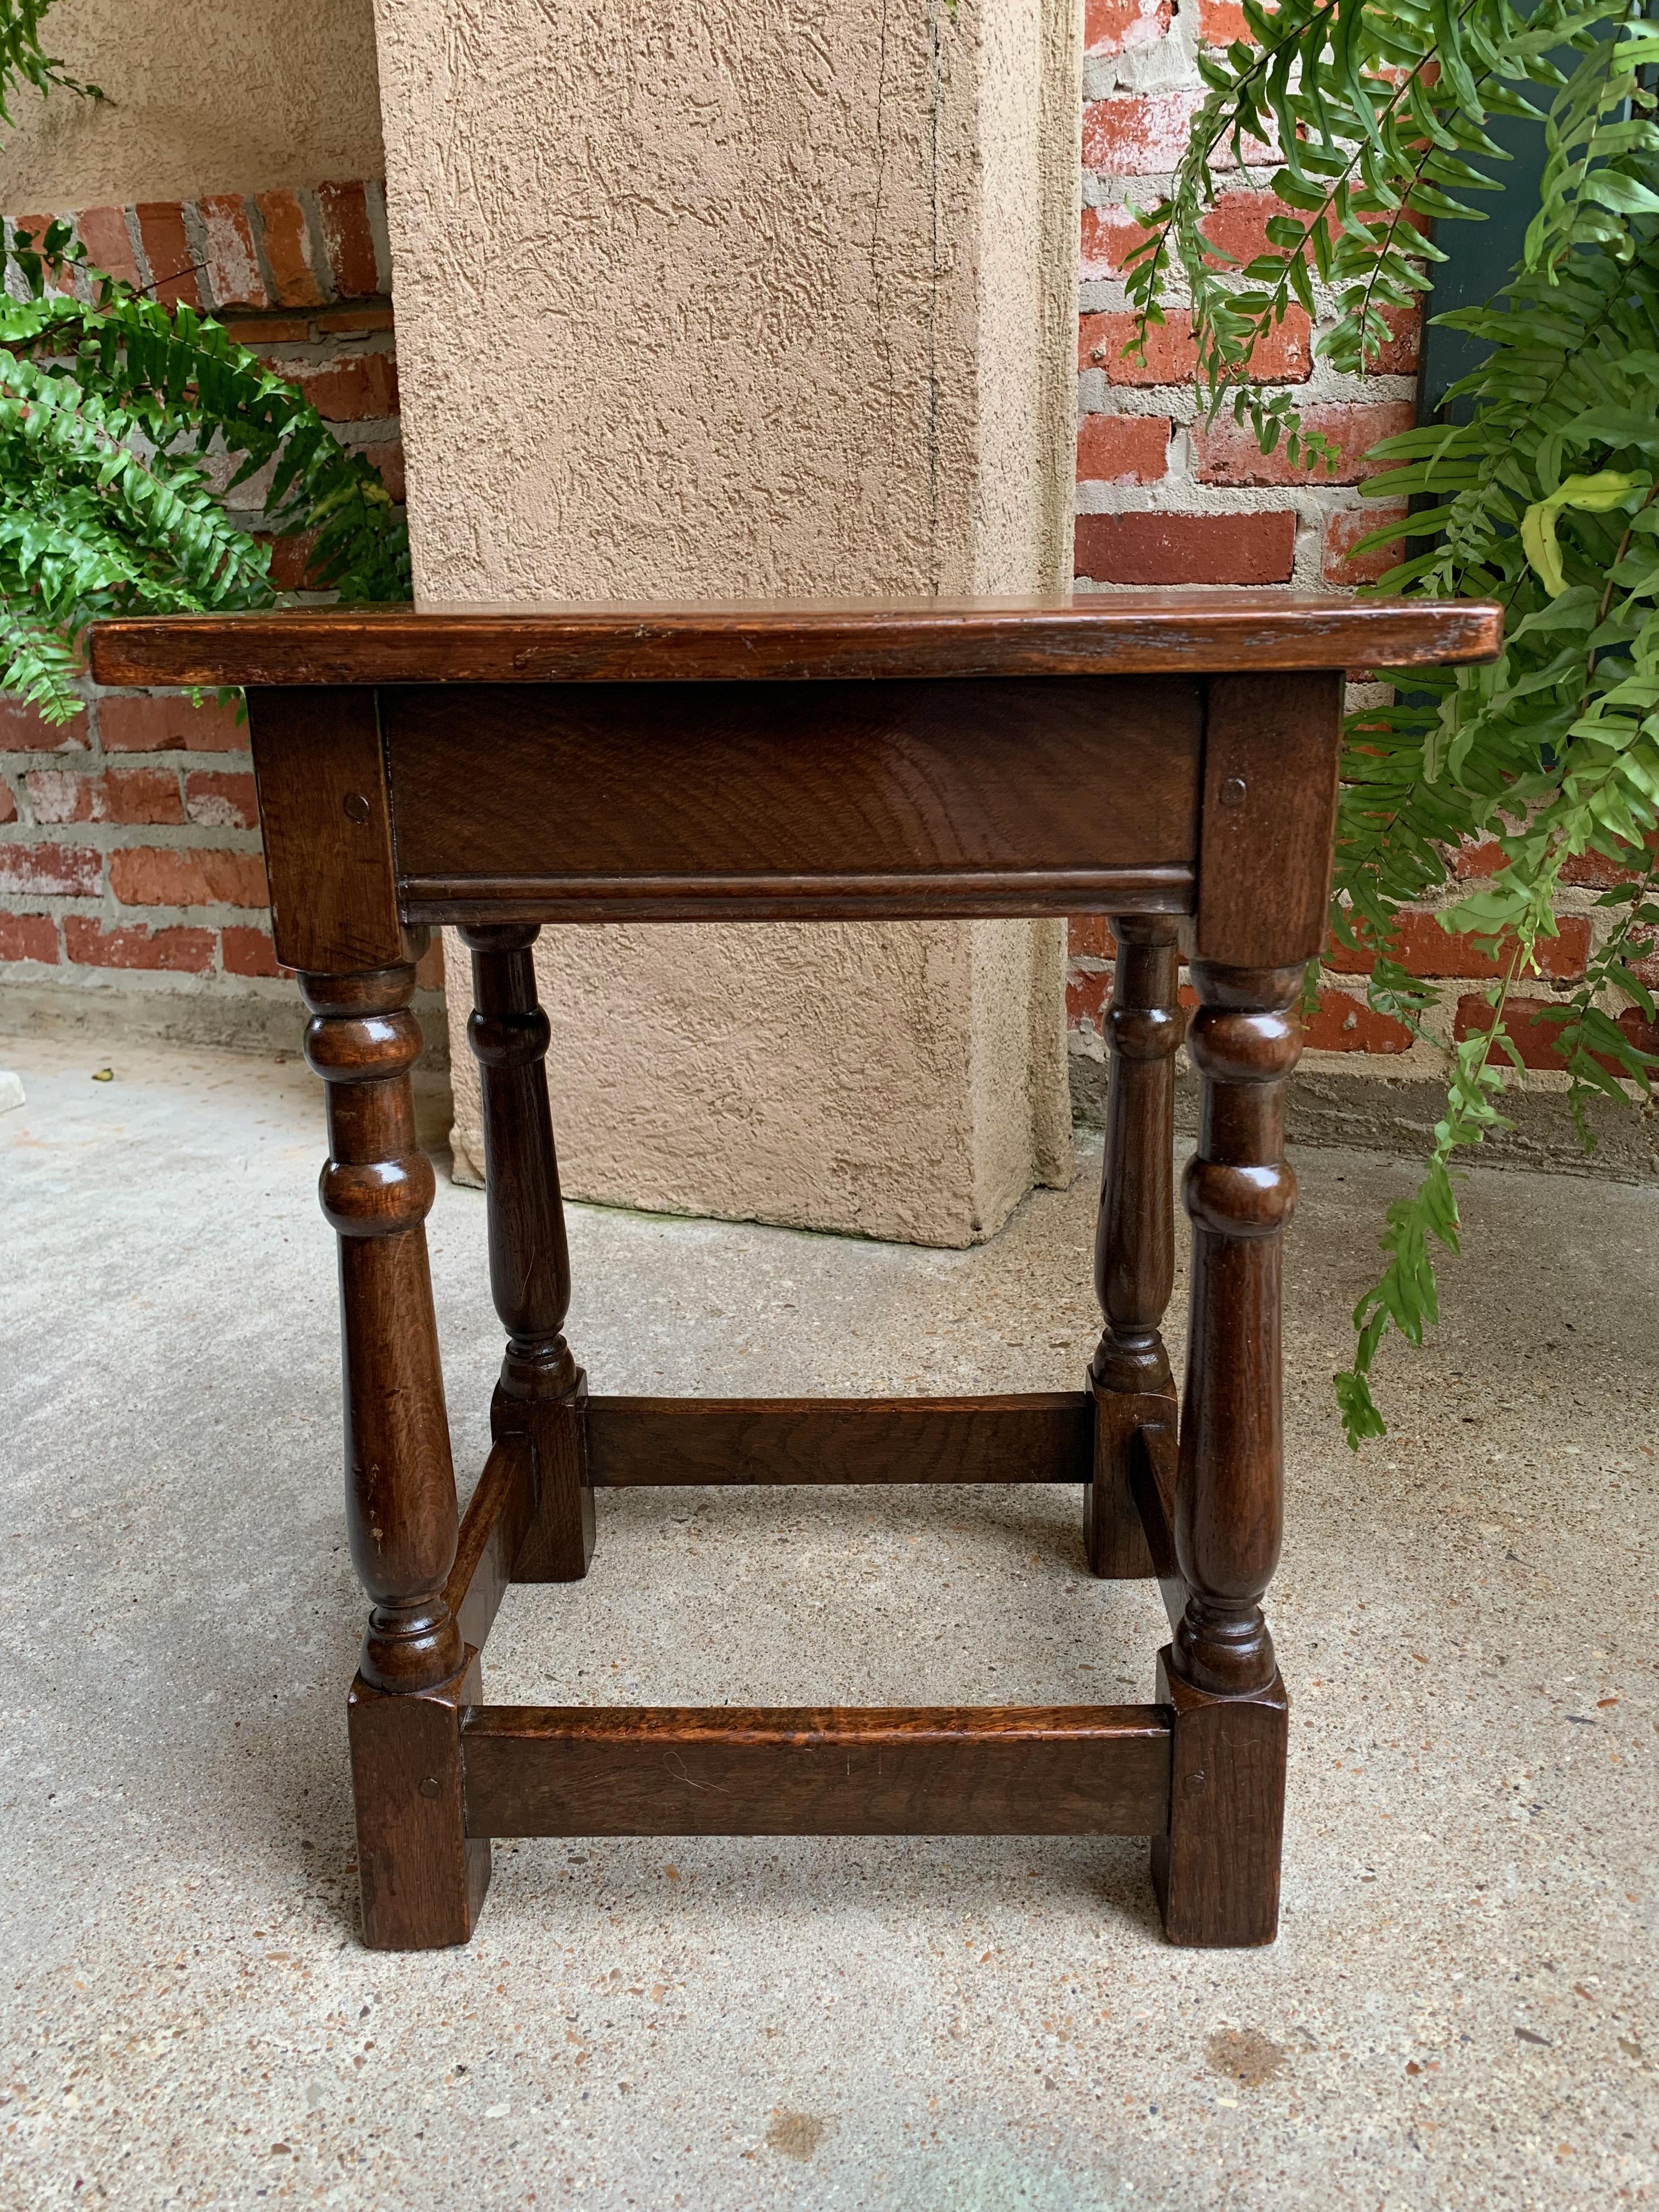 Antique English Carved Tiger Oak Joint Stool Bench Table Splayed Leg c1900 5